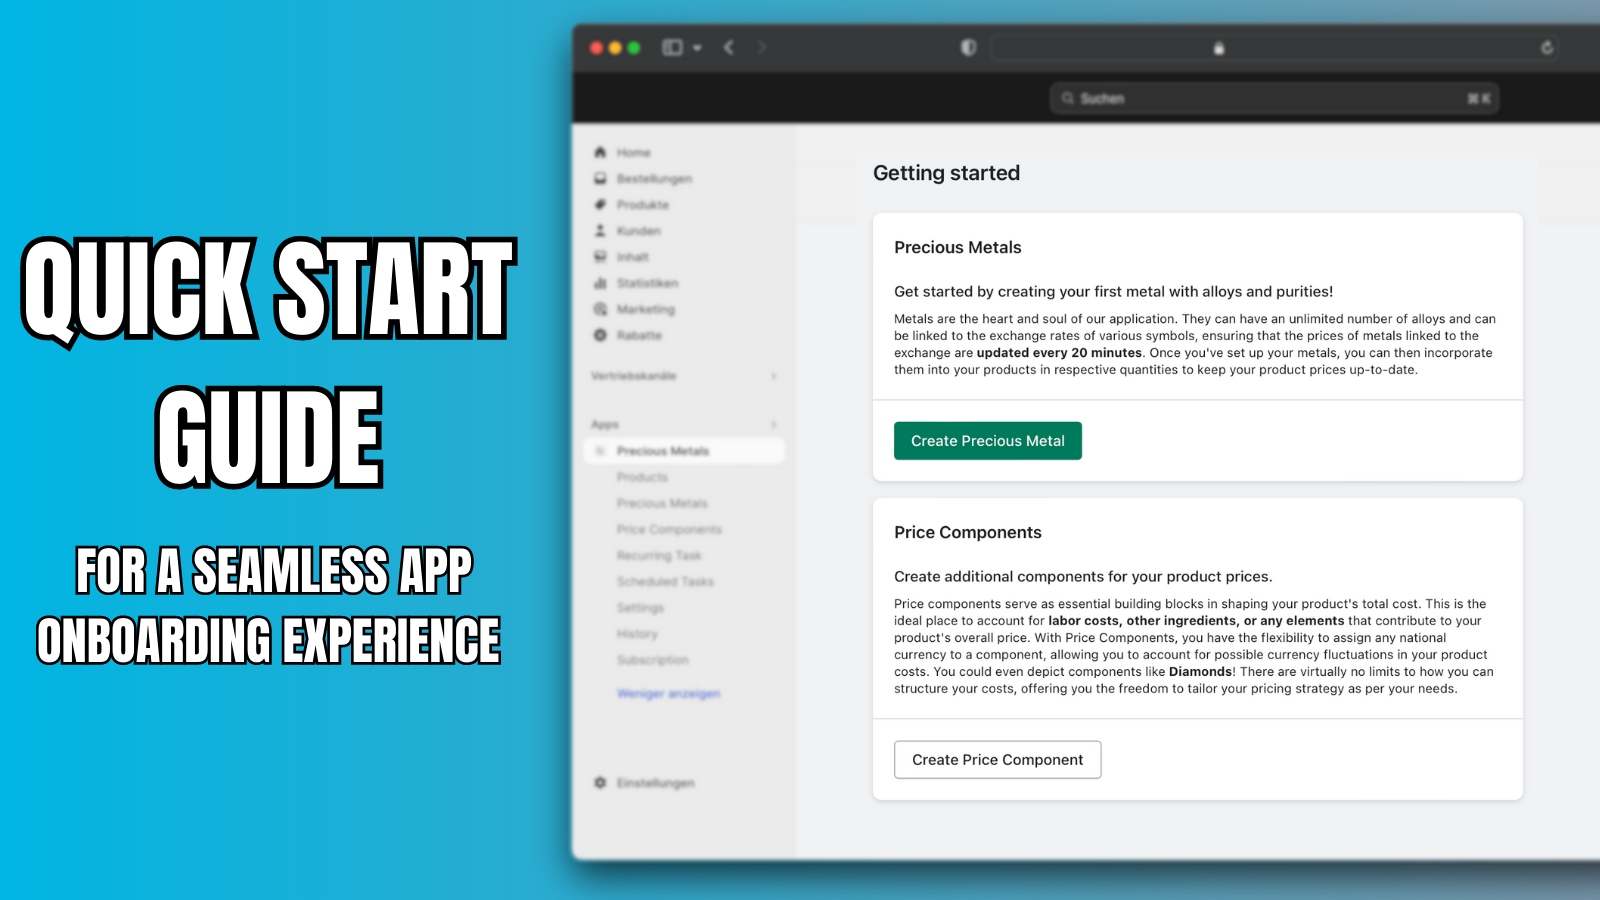 Quick Start Guide for seamless app onboarding experience.